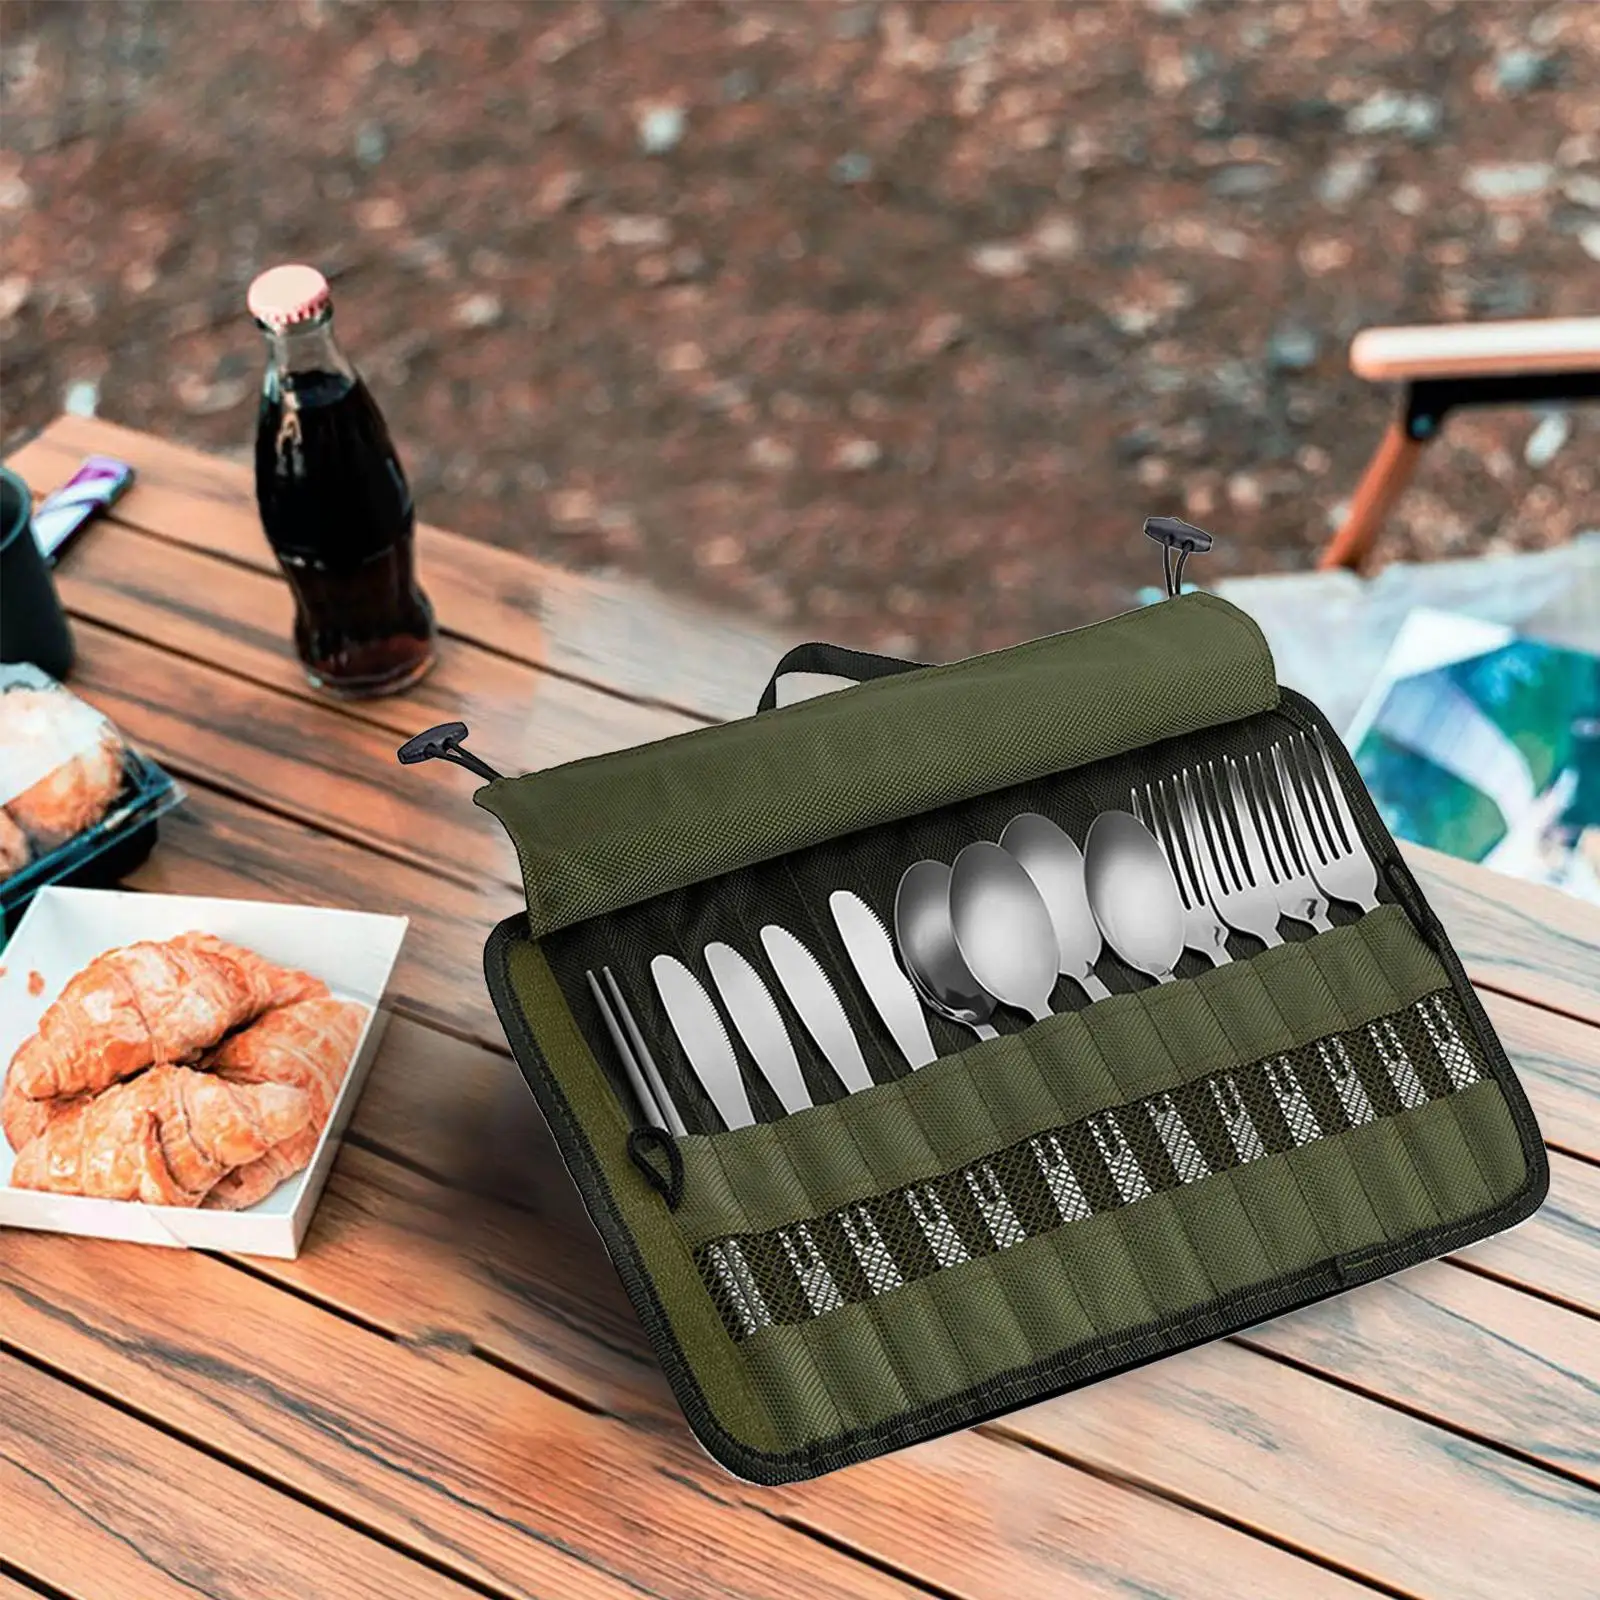 Green Camping Picnic Utensil Travel Case Lightweight for Hiking Bbqs for Family Outings to Beach, Park Stylish Durable Portable